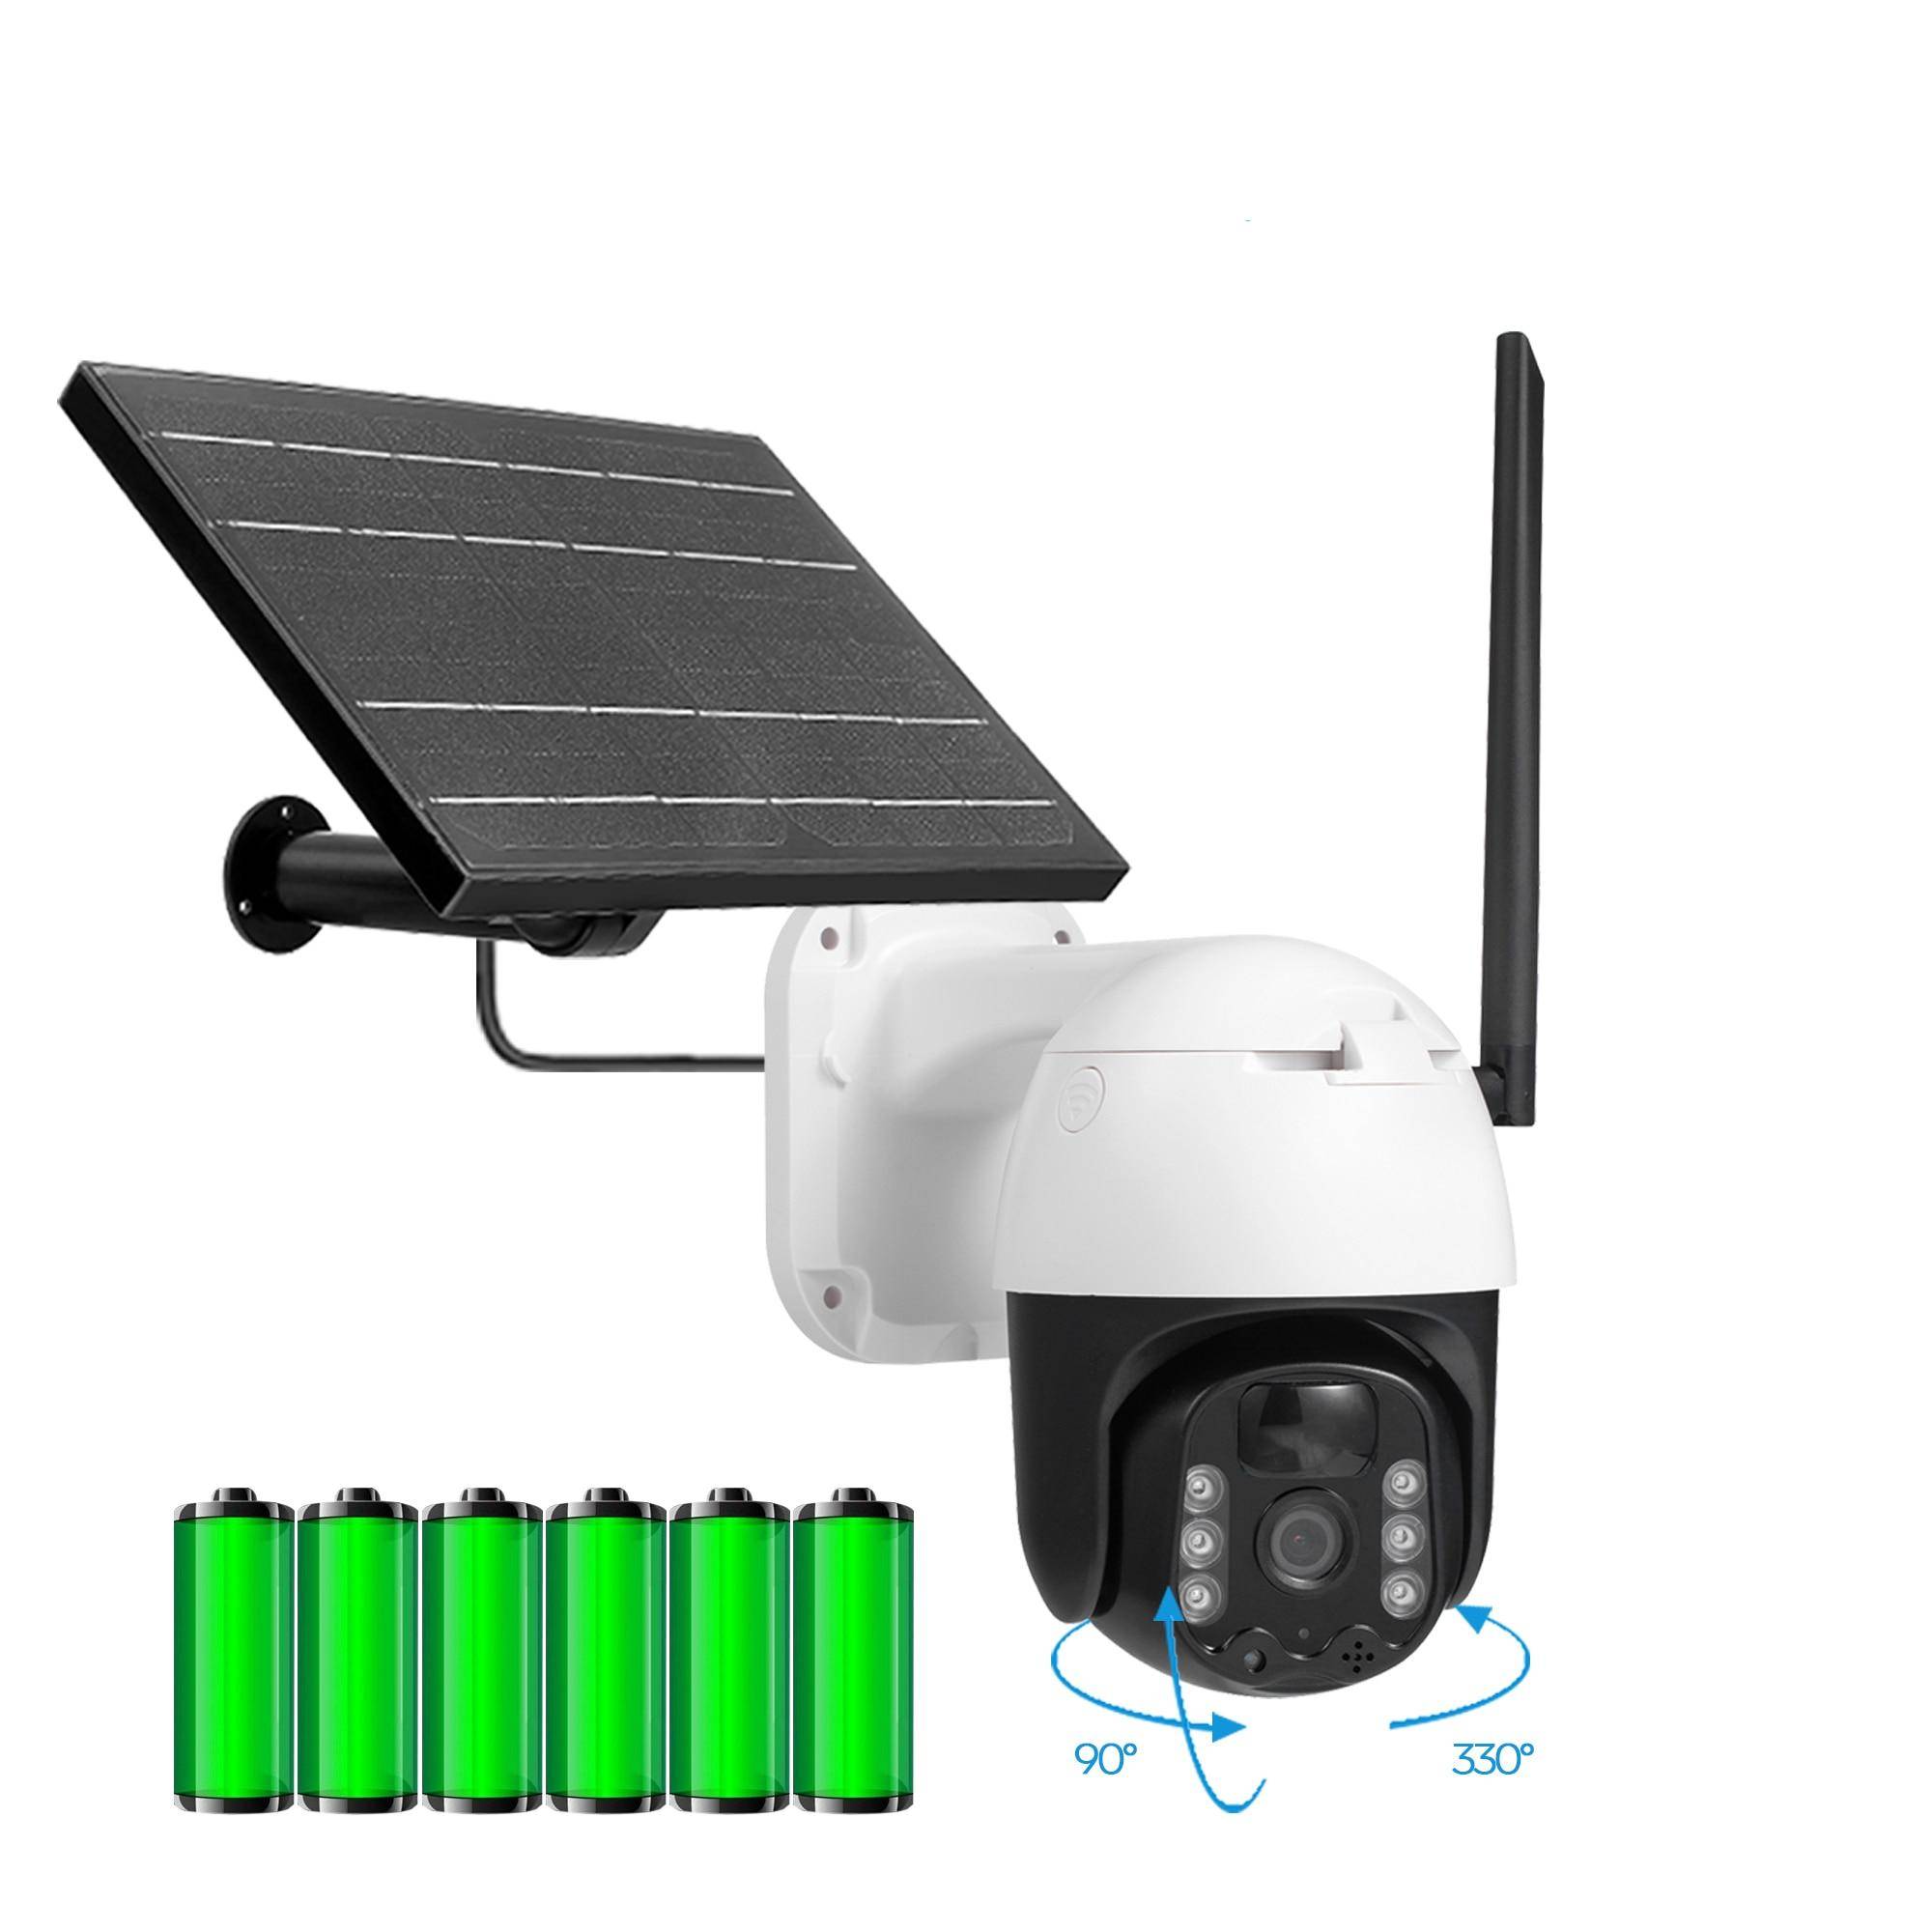 WIFI Solar Home Security Camera with Flexible Angle Lighting Gadgets Solar Powered Security Lights